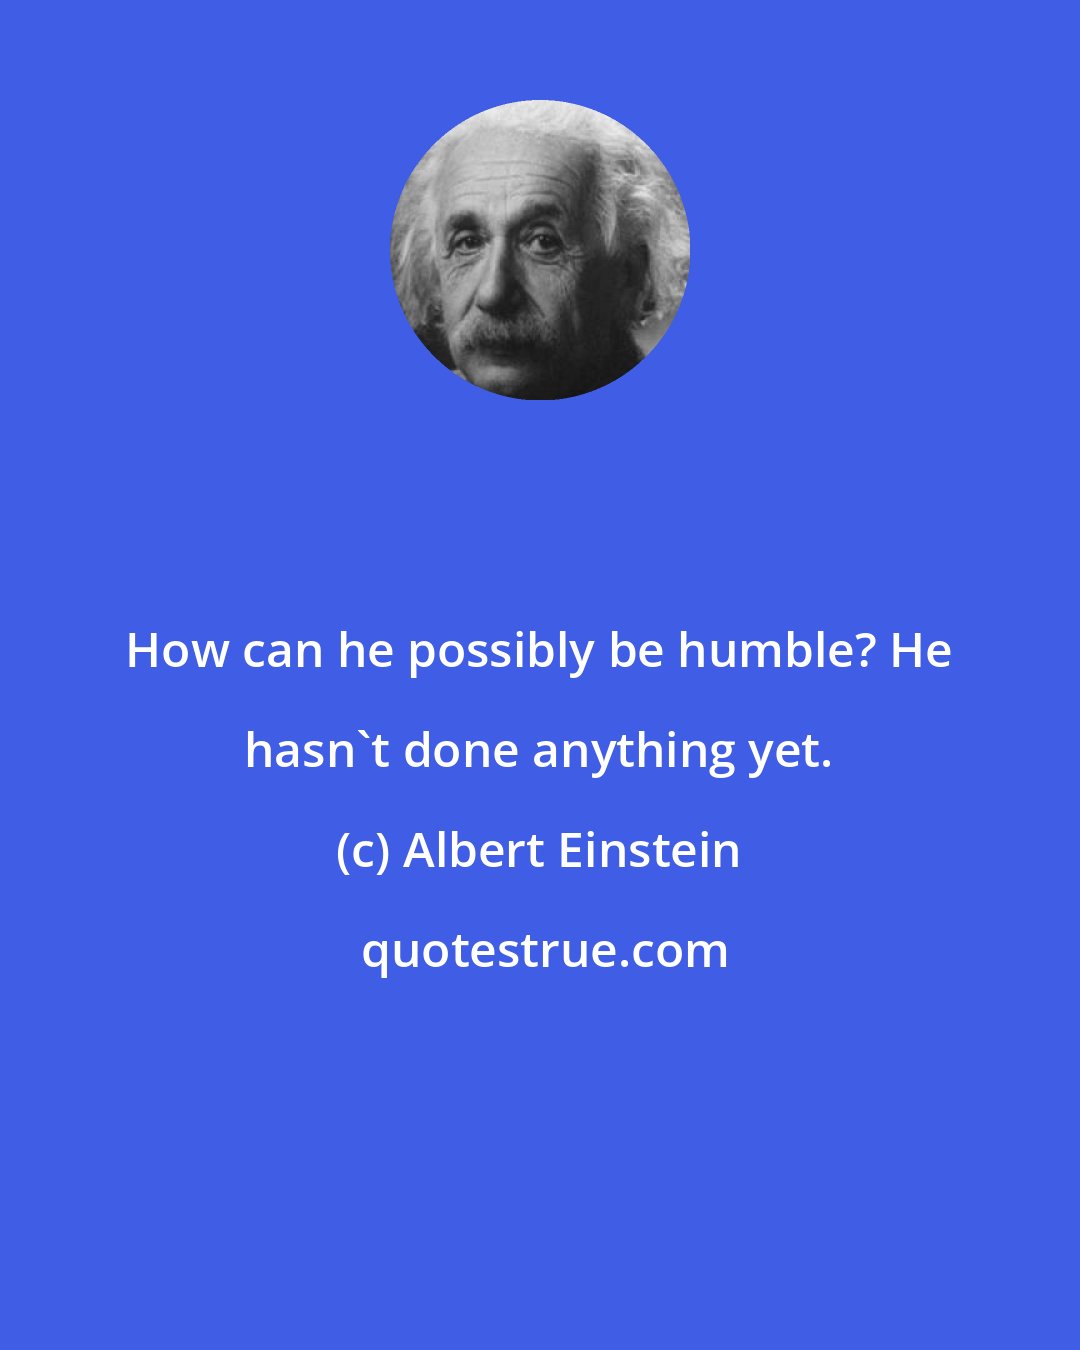 Albert Einstein: How can he possibly be humble? He hasn't done anything yet.